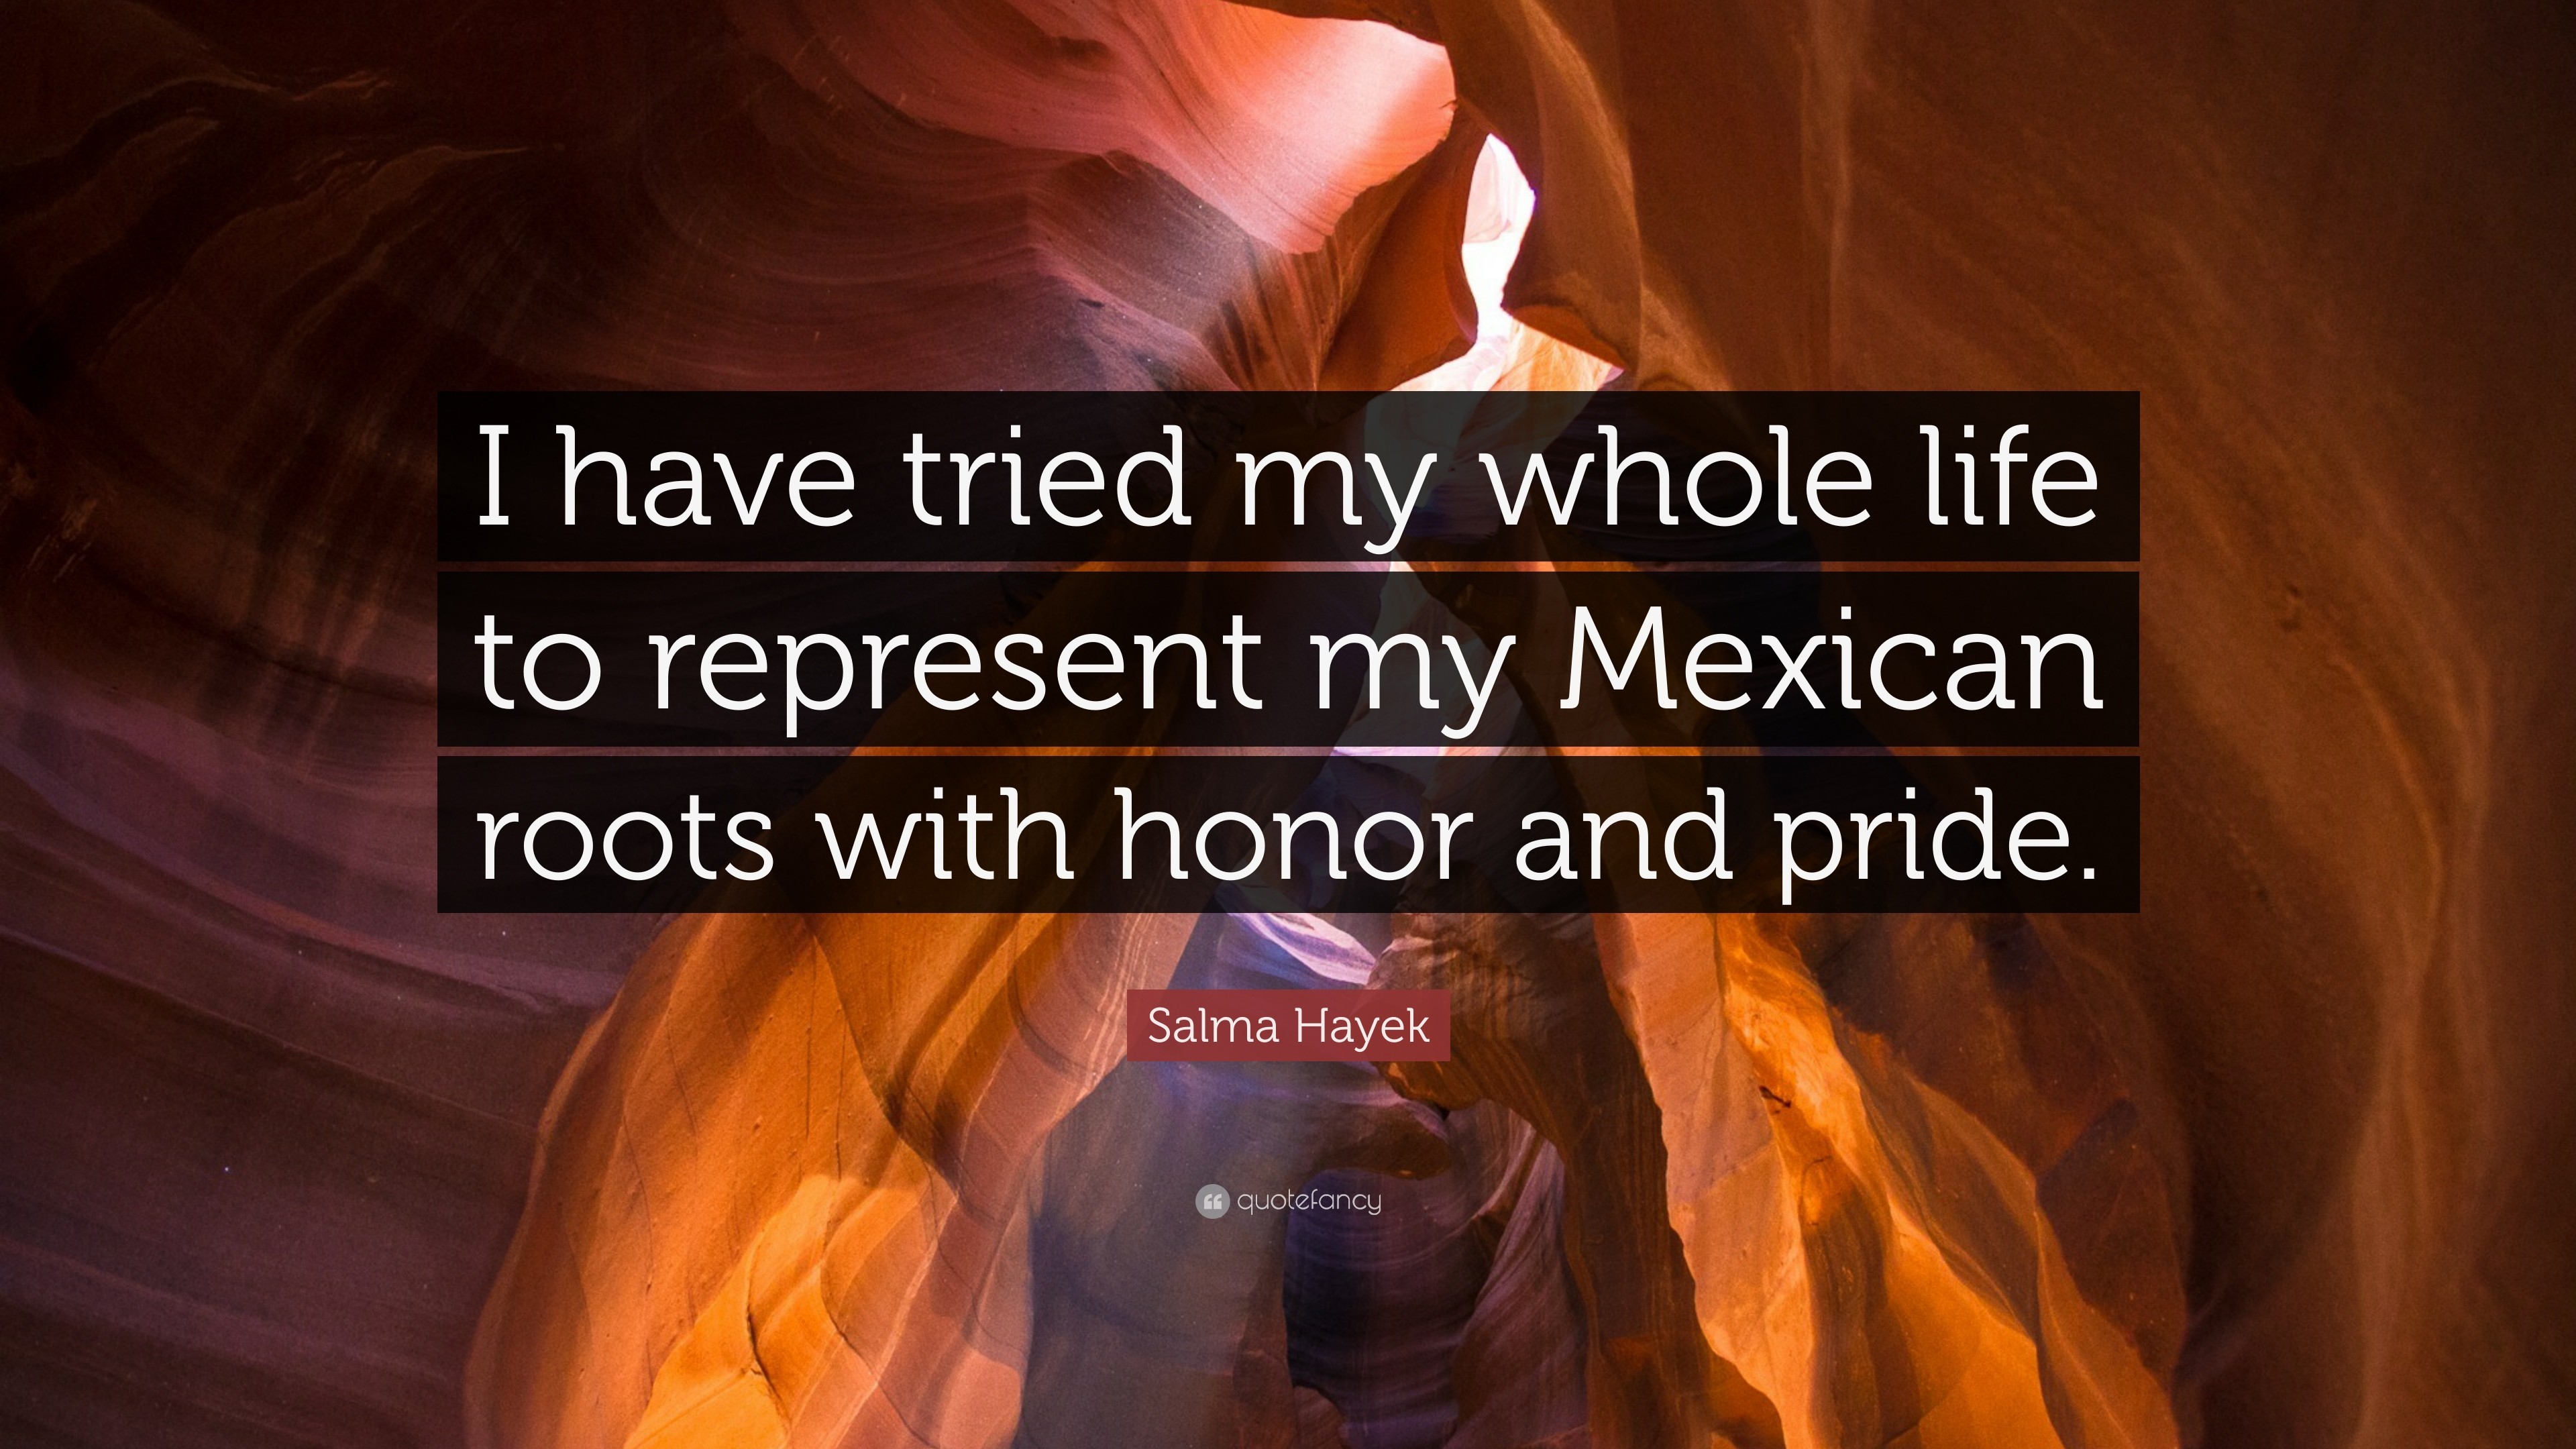 3840x2160 Salma Hayek Quote: “I have tried my whole life to represent my Mexican roots